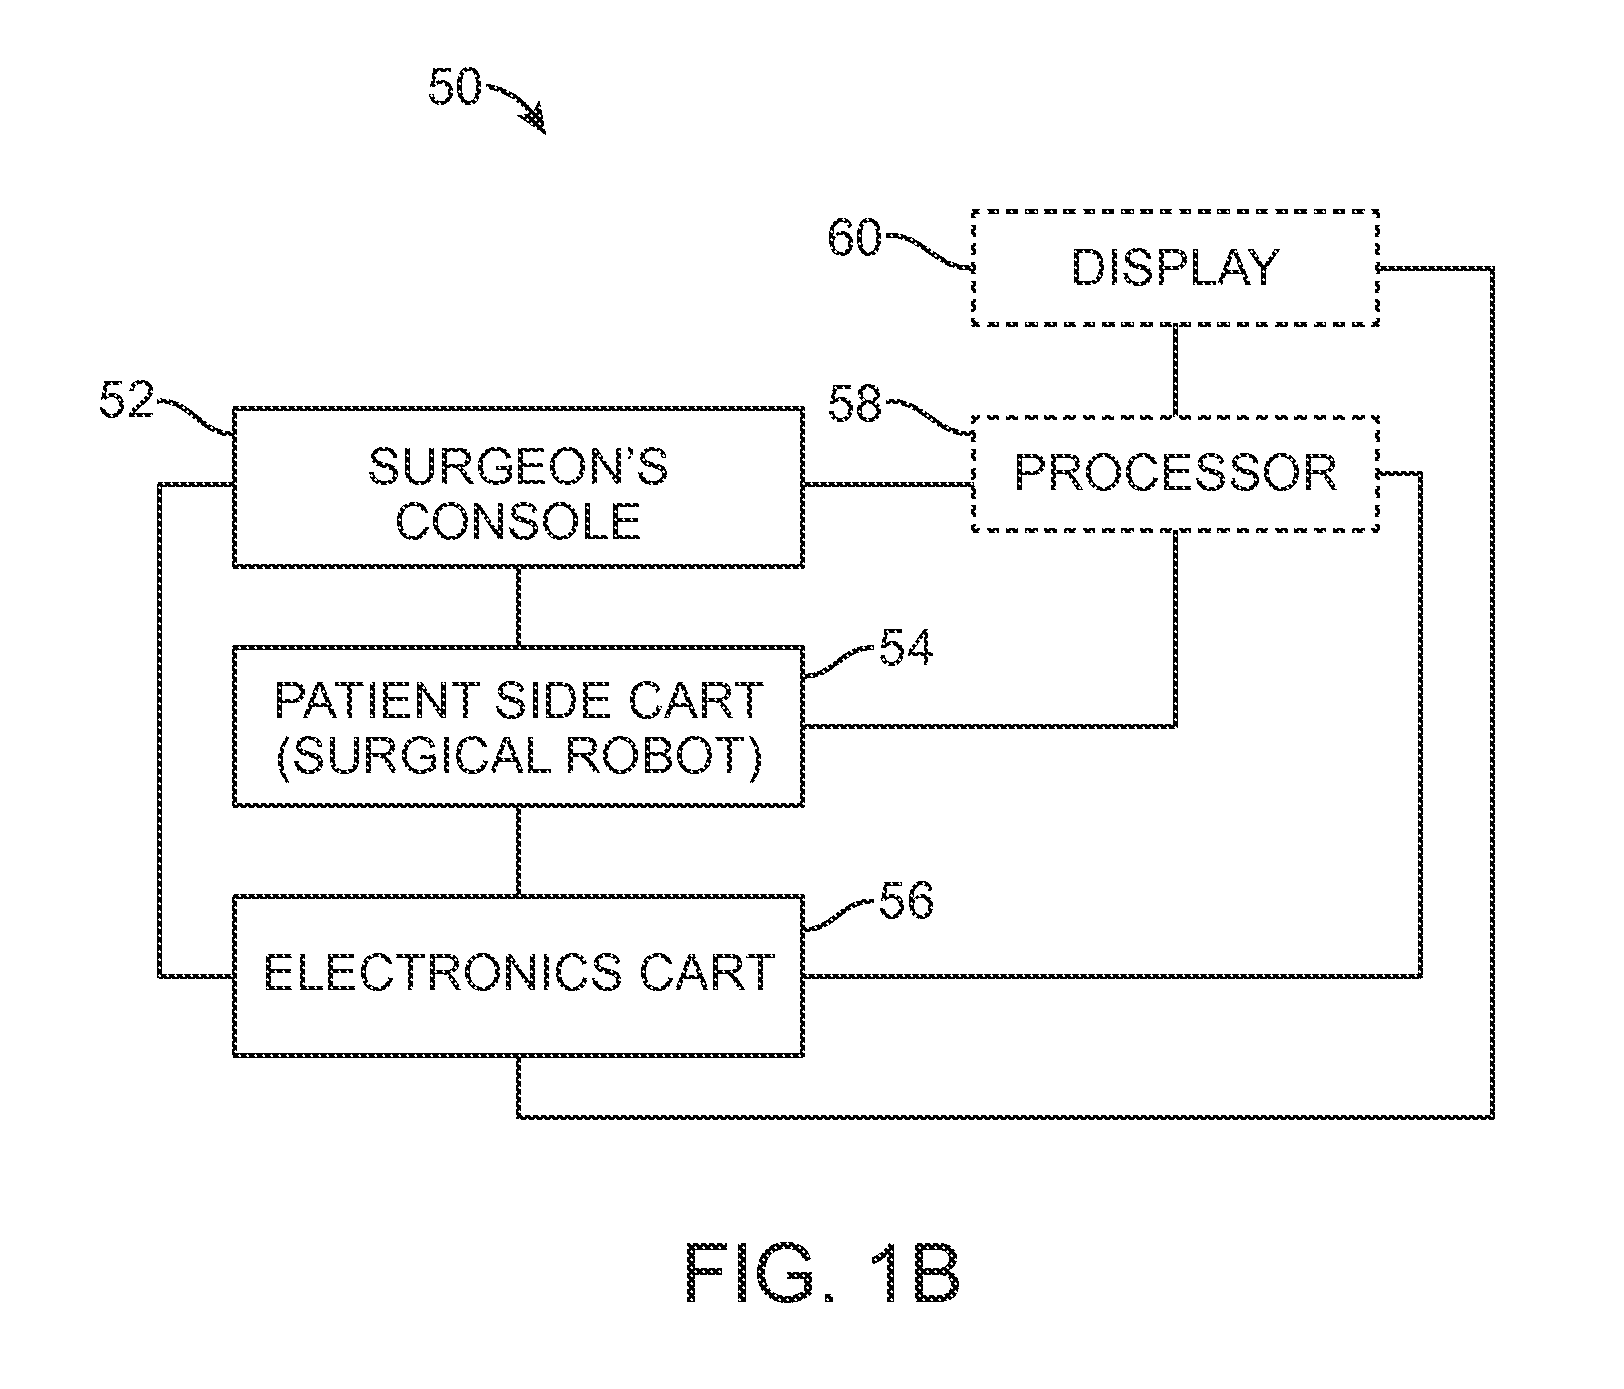 System and methods for managing multiple null-space objectives and SLI behaviors